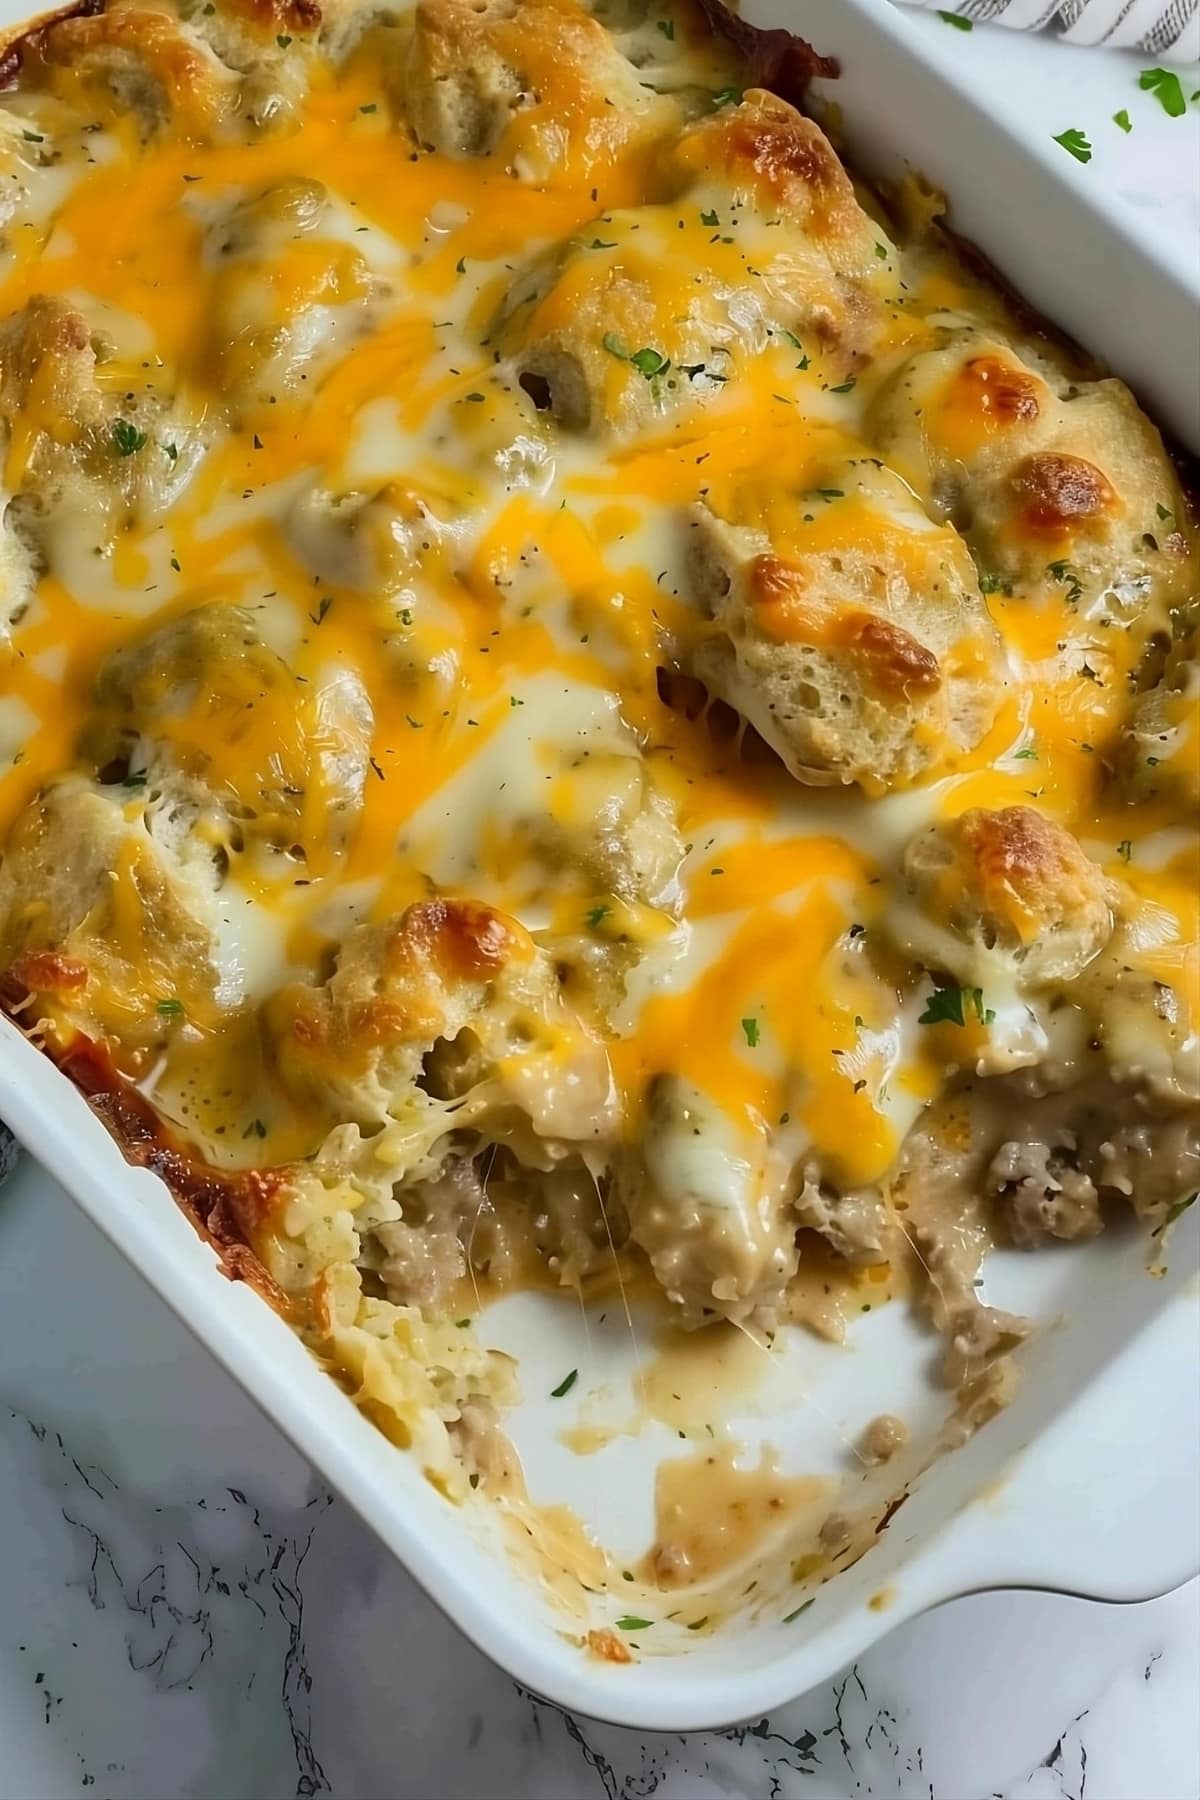 Top view of cheesy biscuits and gravy casserole in a baking dish.